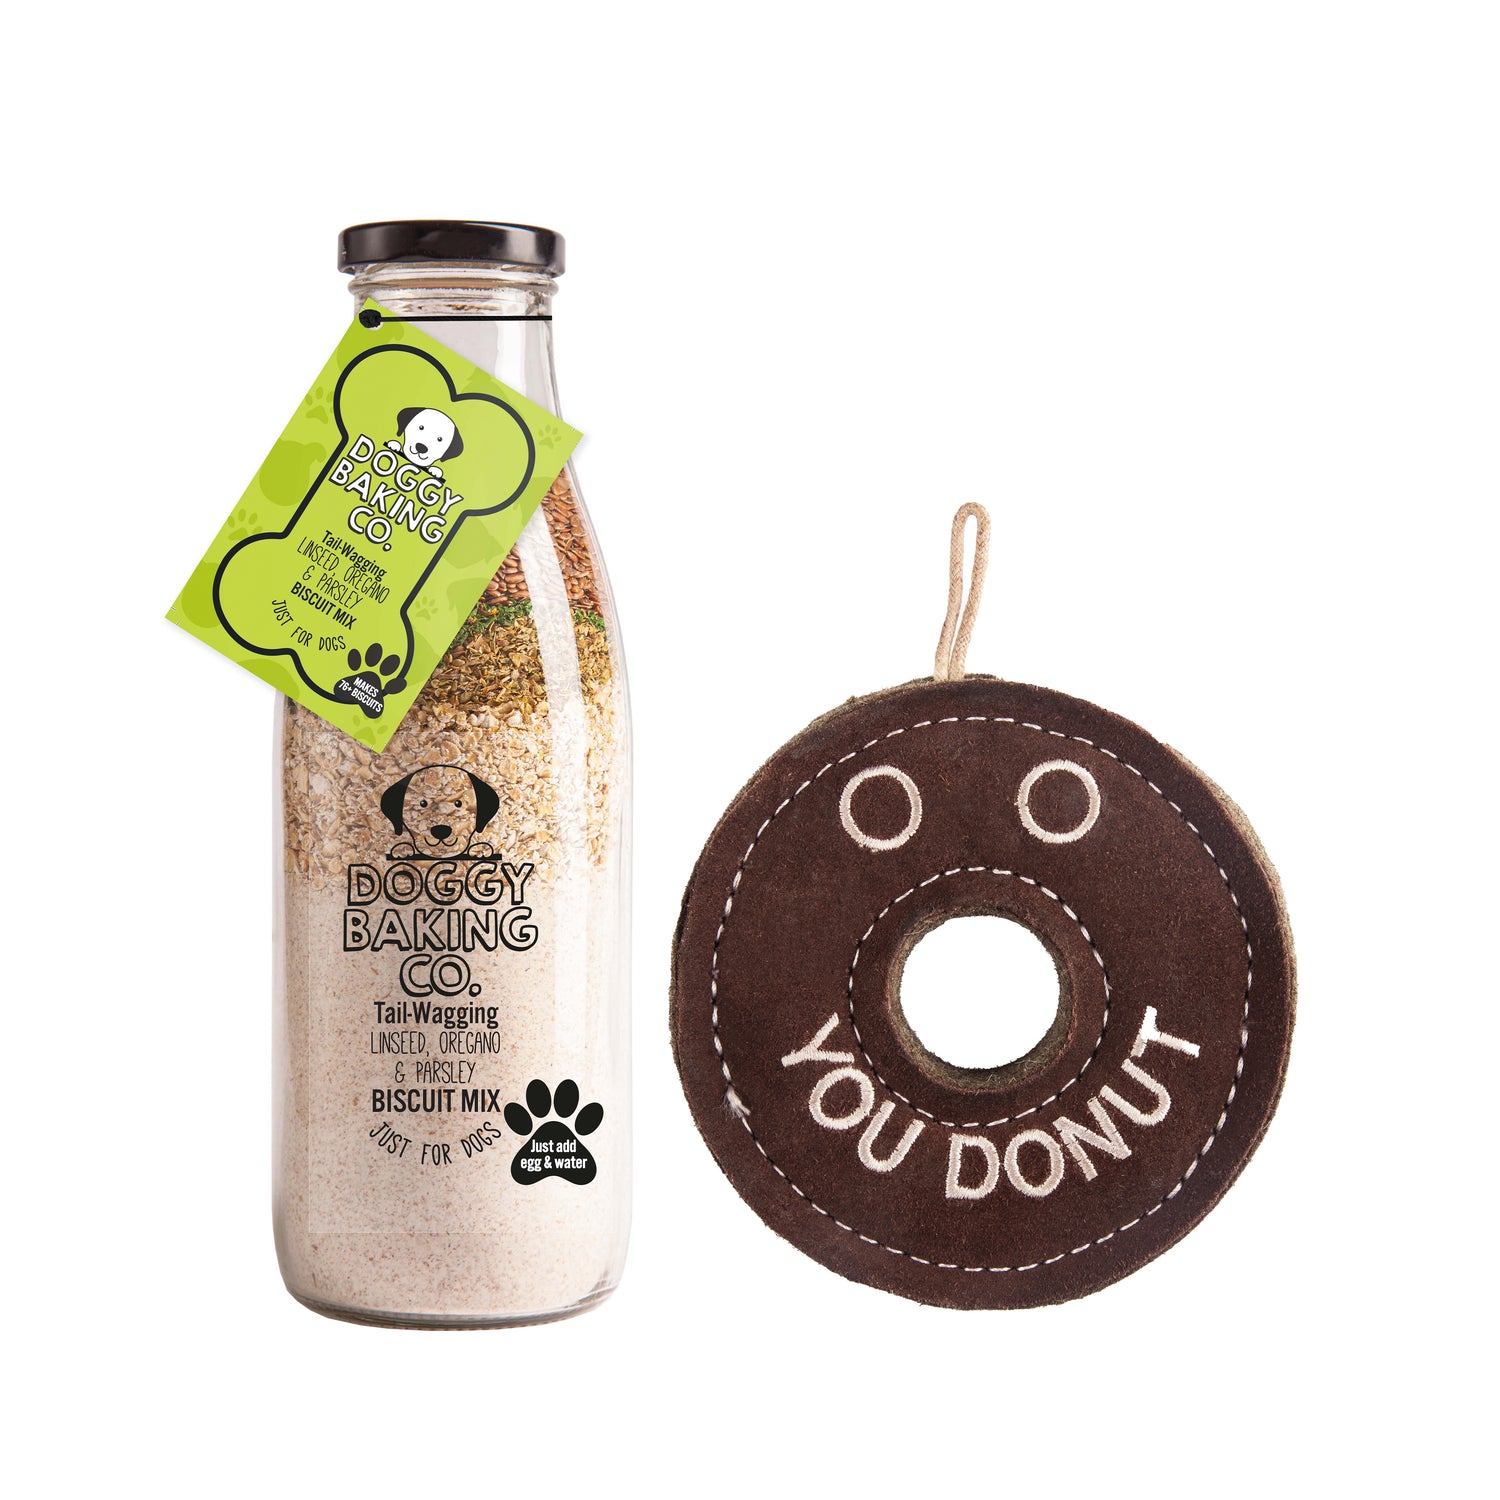 Linseed, Oregano & Parsley Biscuit Baking Mix & Donut Toy - Doggy Baking Co by The Bottled Baking Co